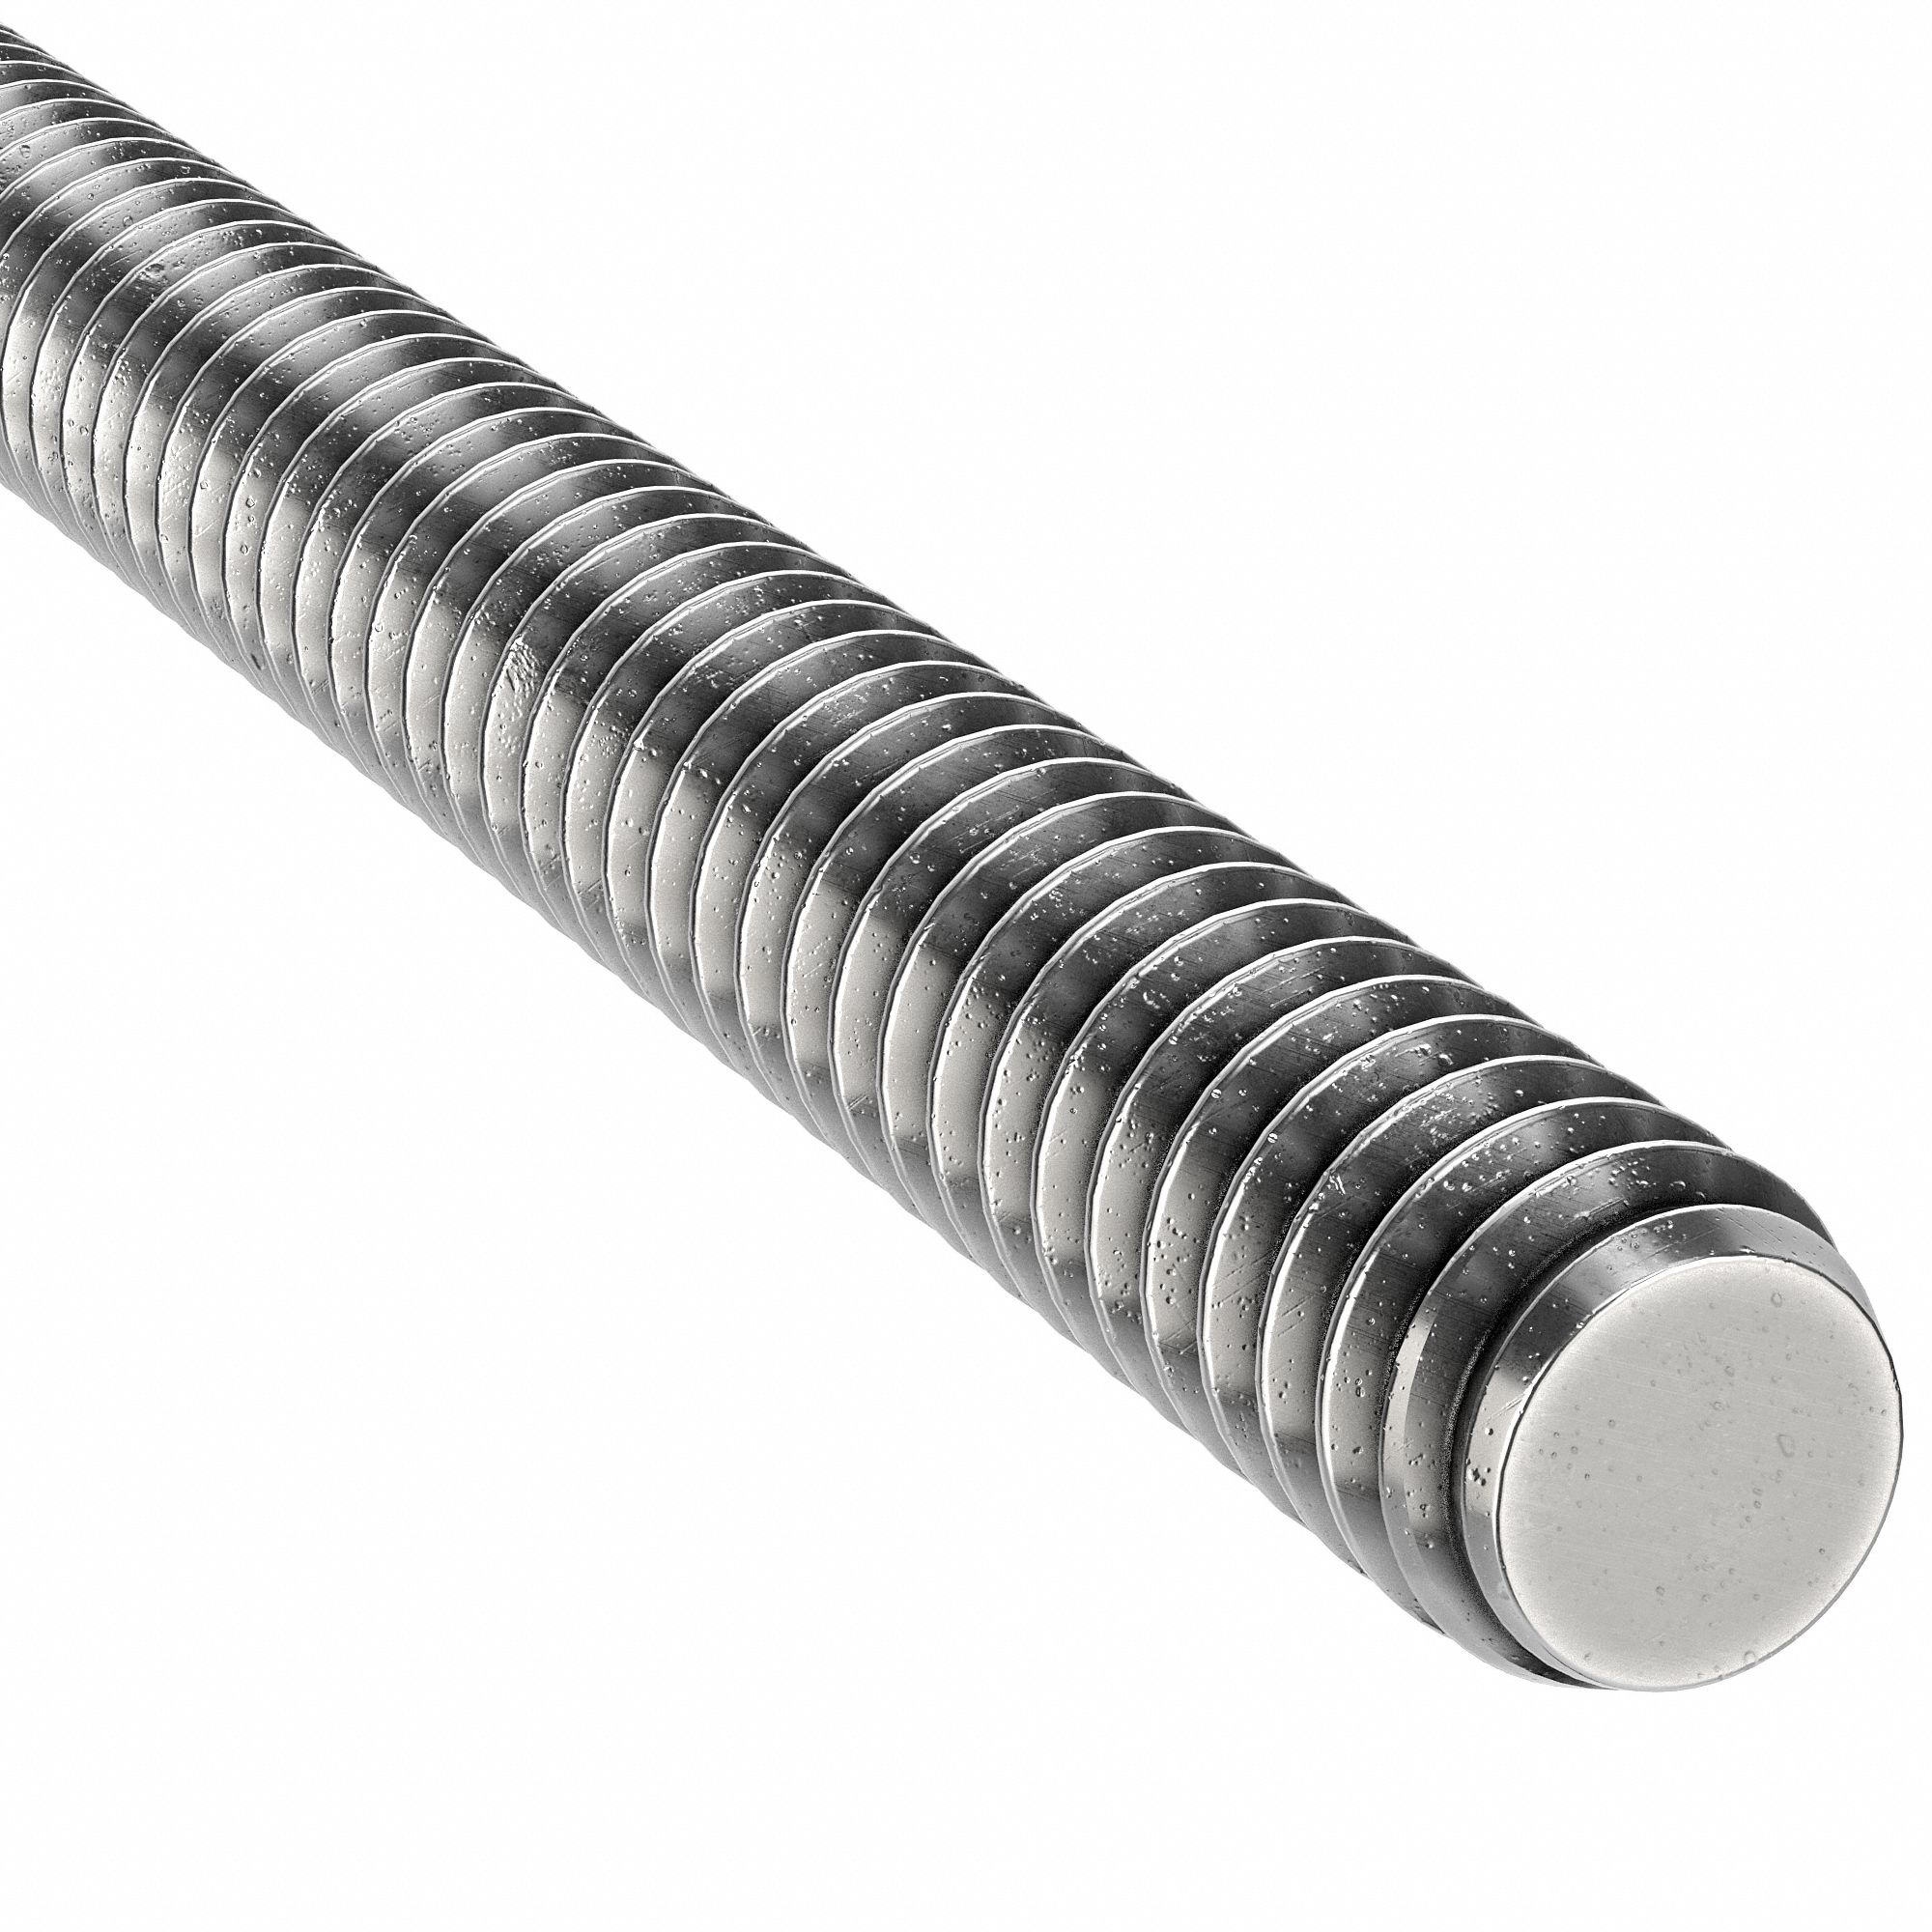 A2 Stainless Steel Fully Threaded Rod/Studding 3-4-5-6-8-10-12-14-16-18-20mm 